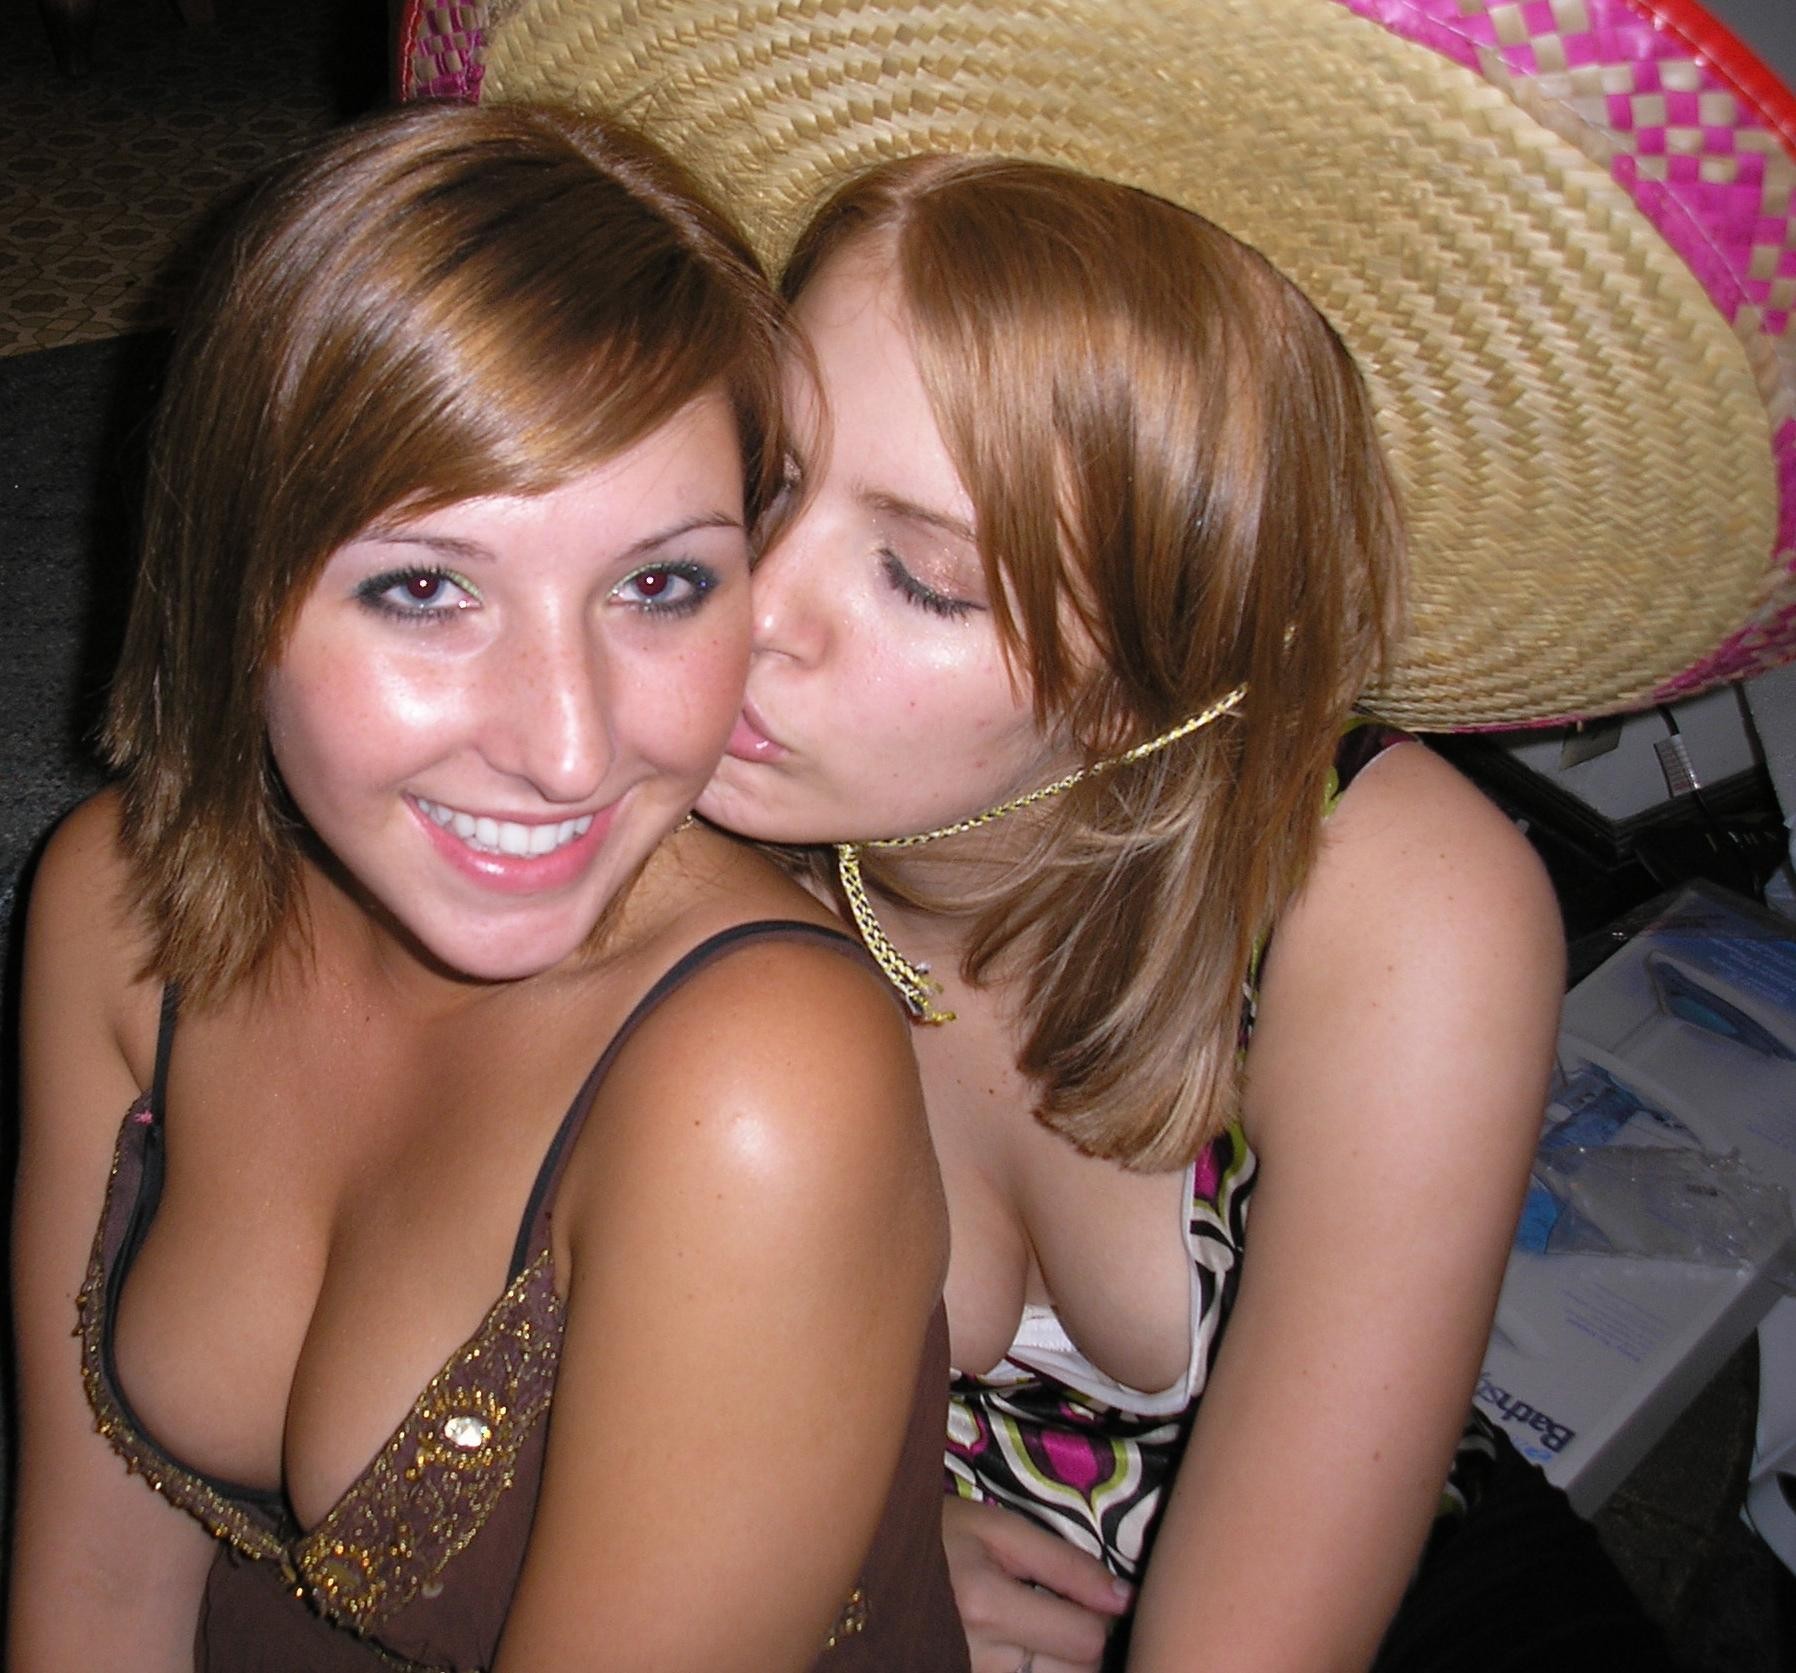 Cute teen down blouse sweet smile two girls.